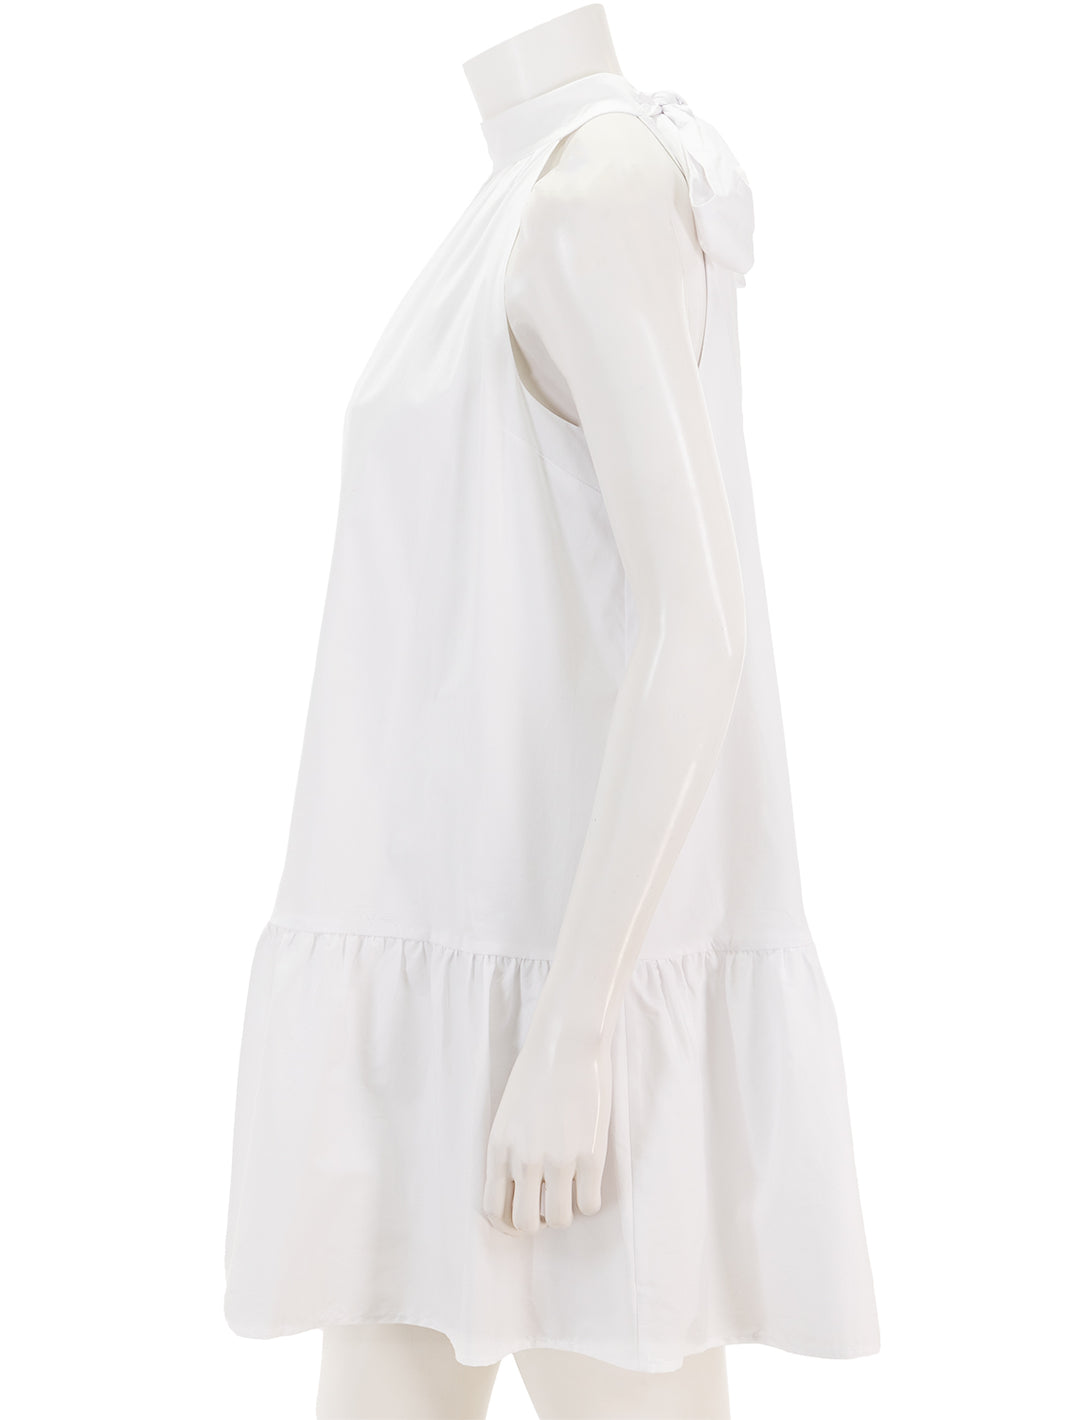 Side view of STAUD's marlowe dress in white.